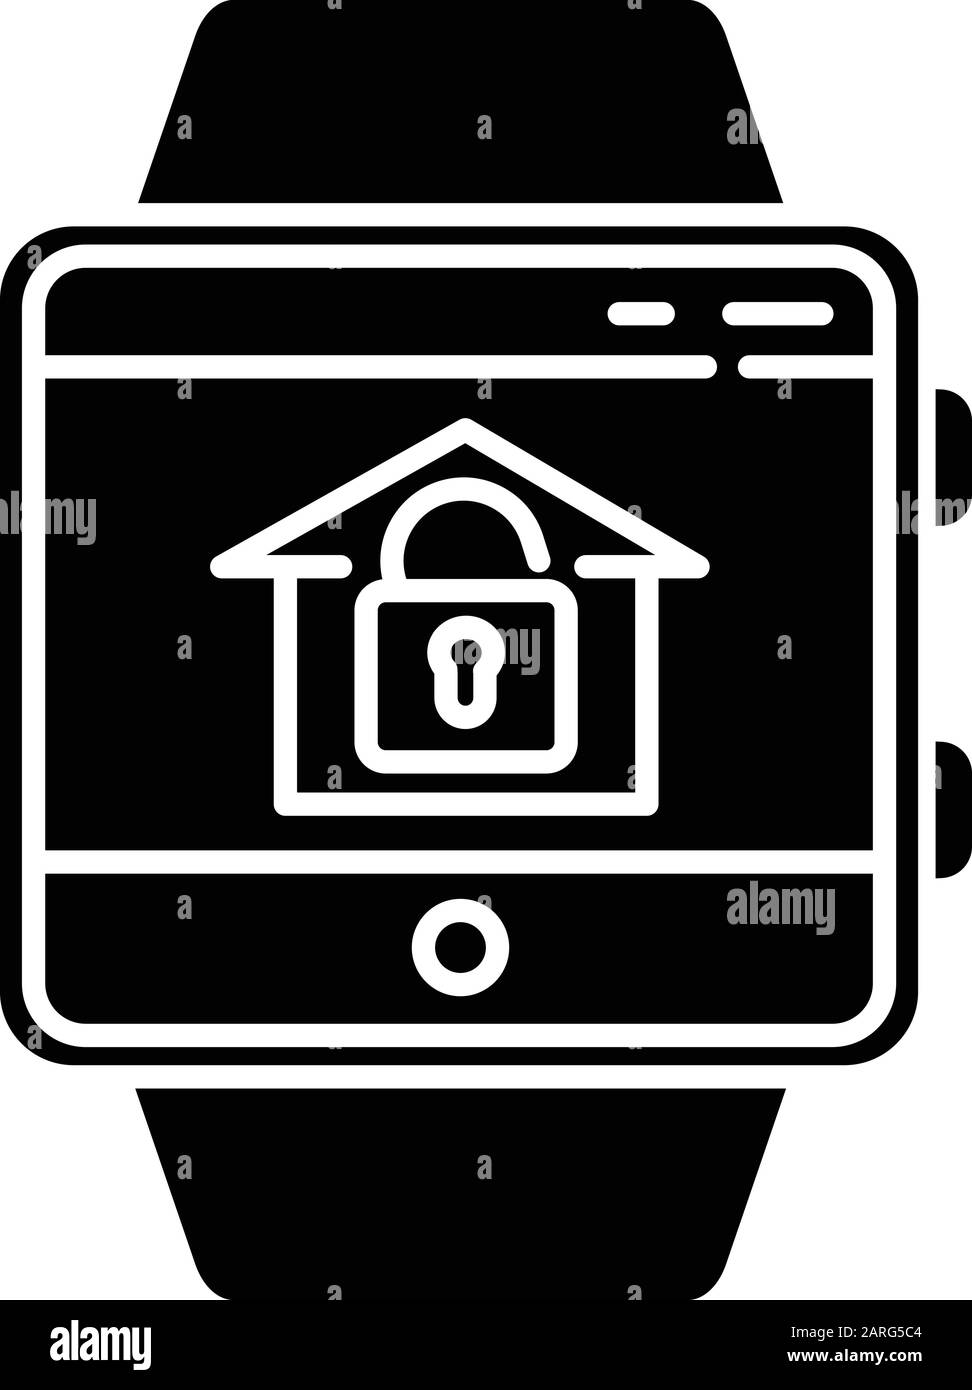 Home security monitoring smartwatch function glyph icon. House alarm system remote control device feature. Fitness wristband. Silhouette symbol. Negat Stock Vector